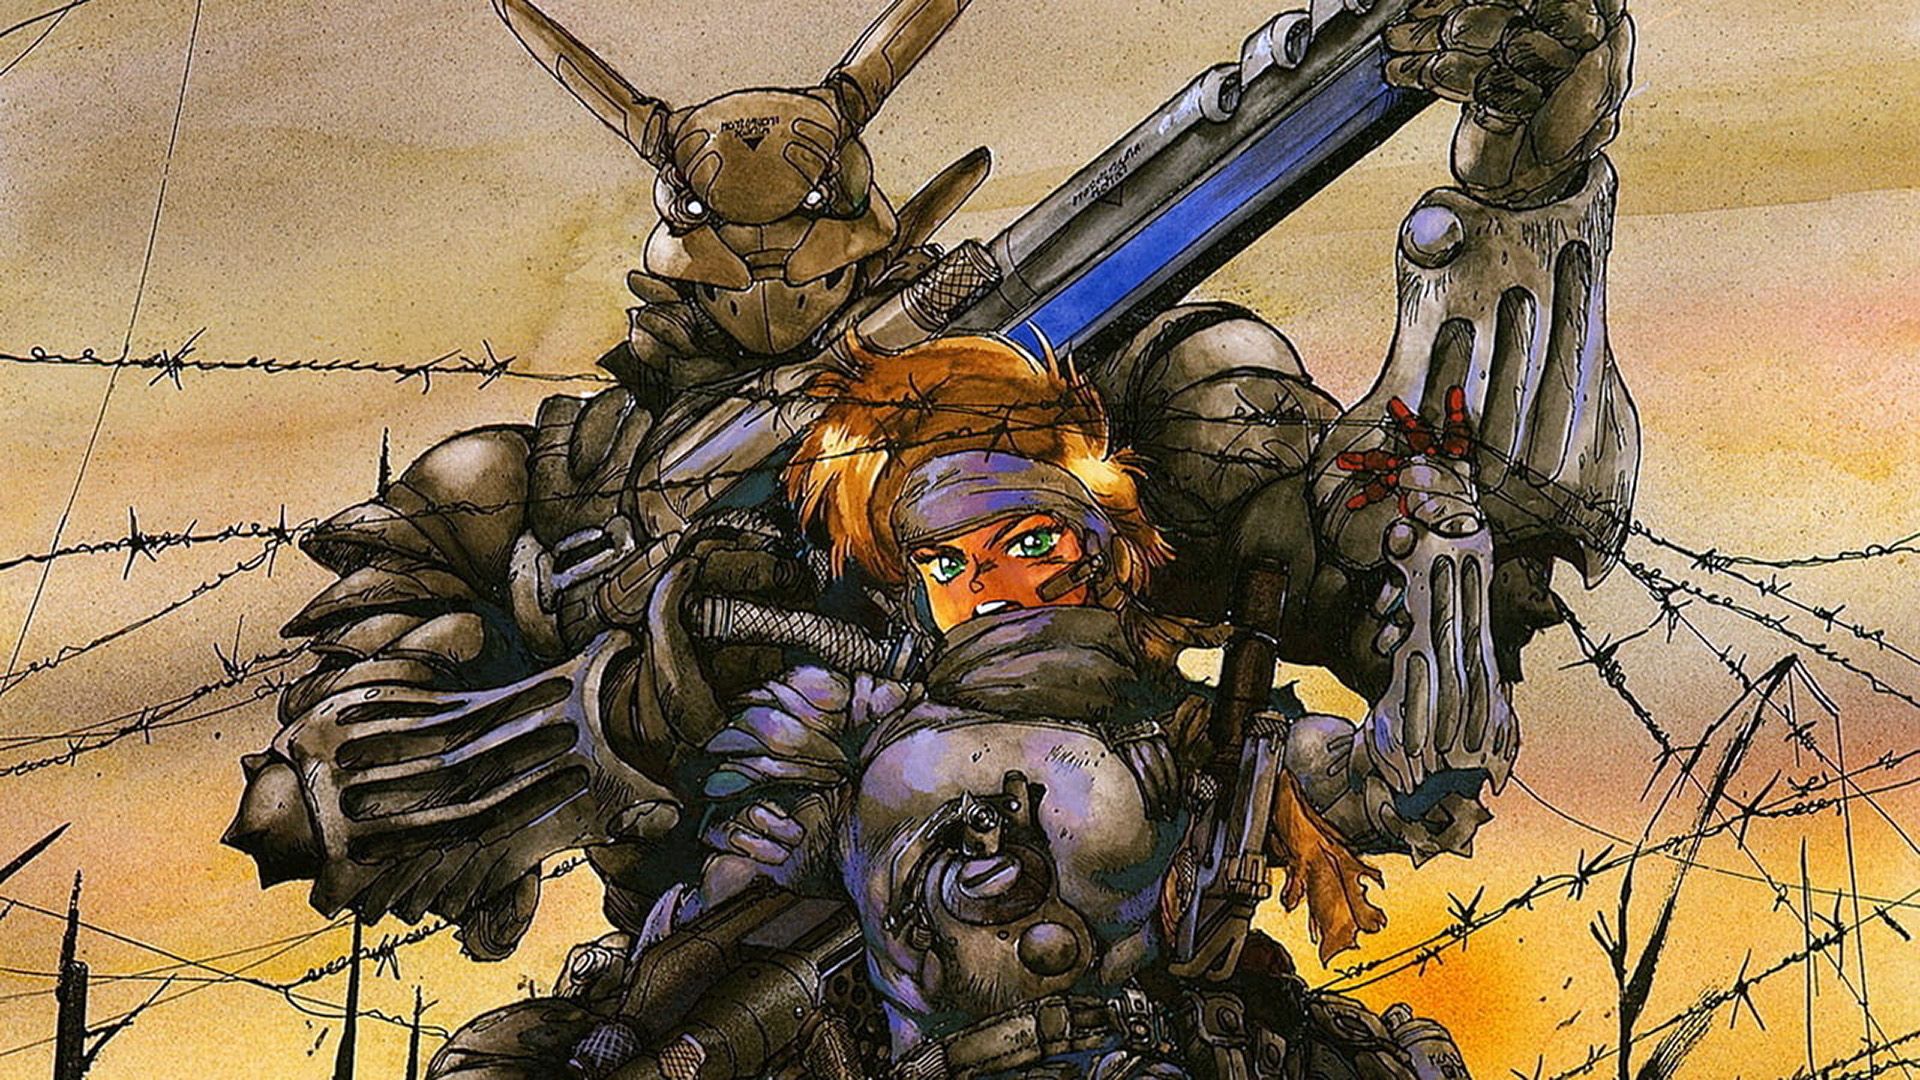 Appleseed background